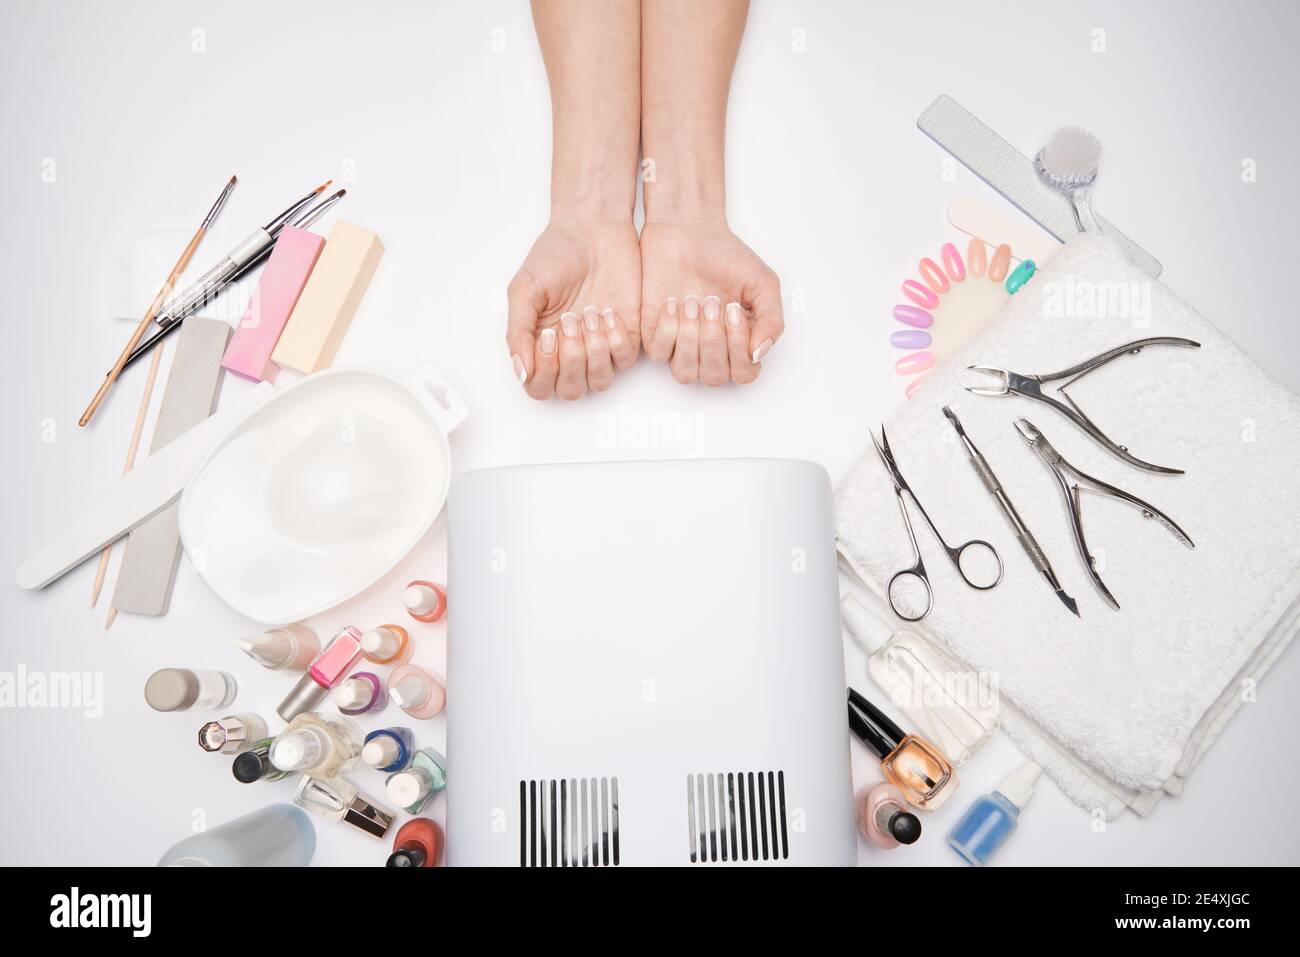 manicure and pedicure items - nail polish drying lamp, nail file, scissors and brushes over light background Stock Photo